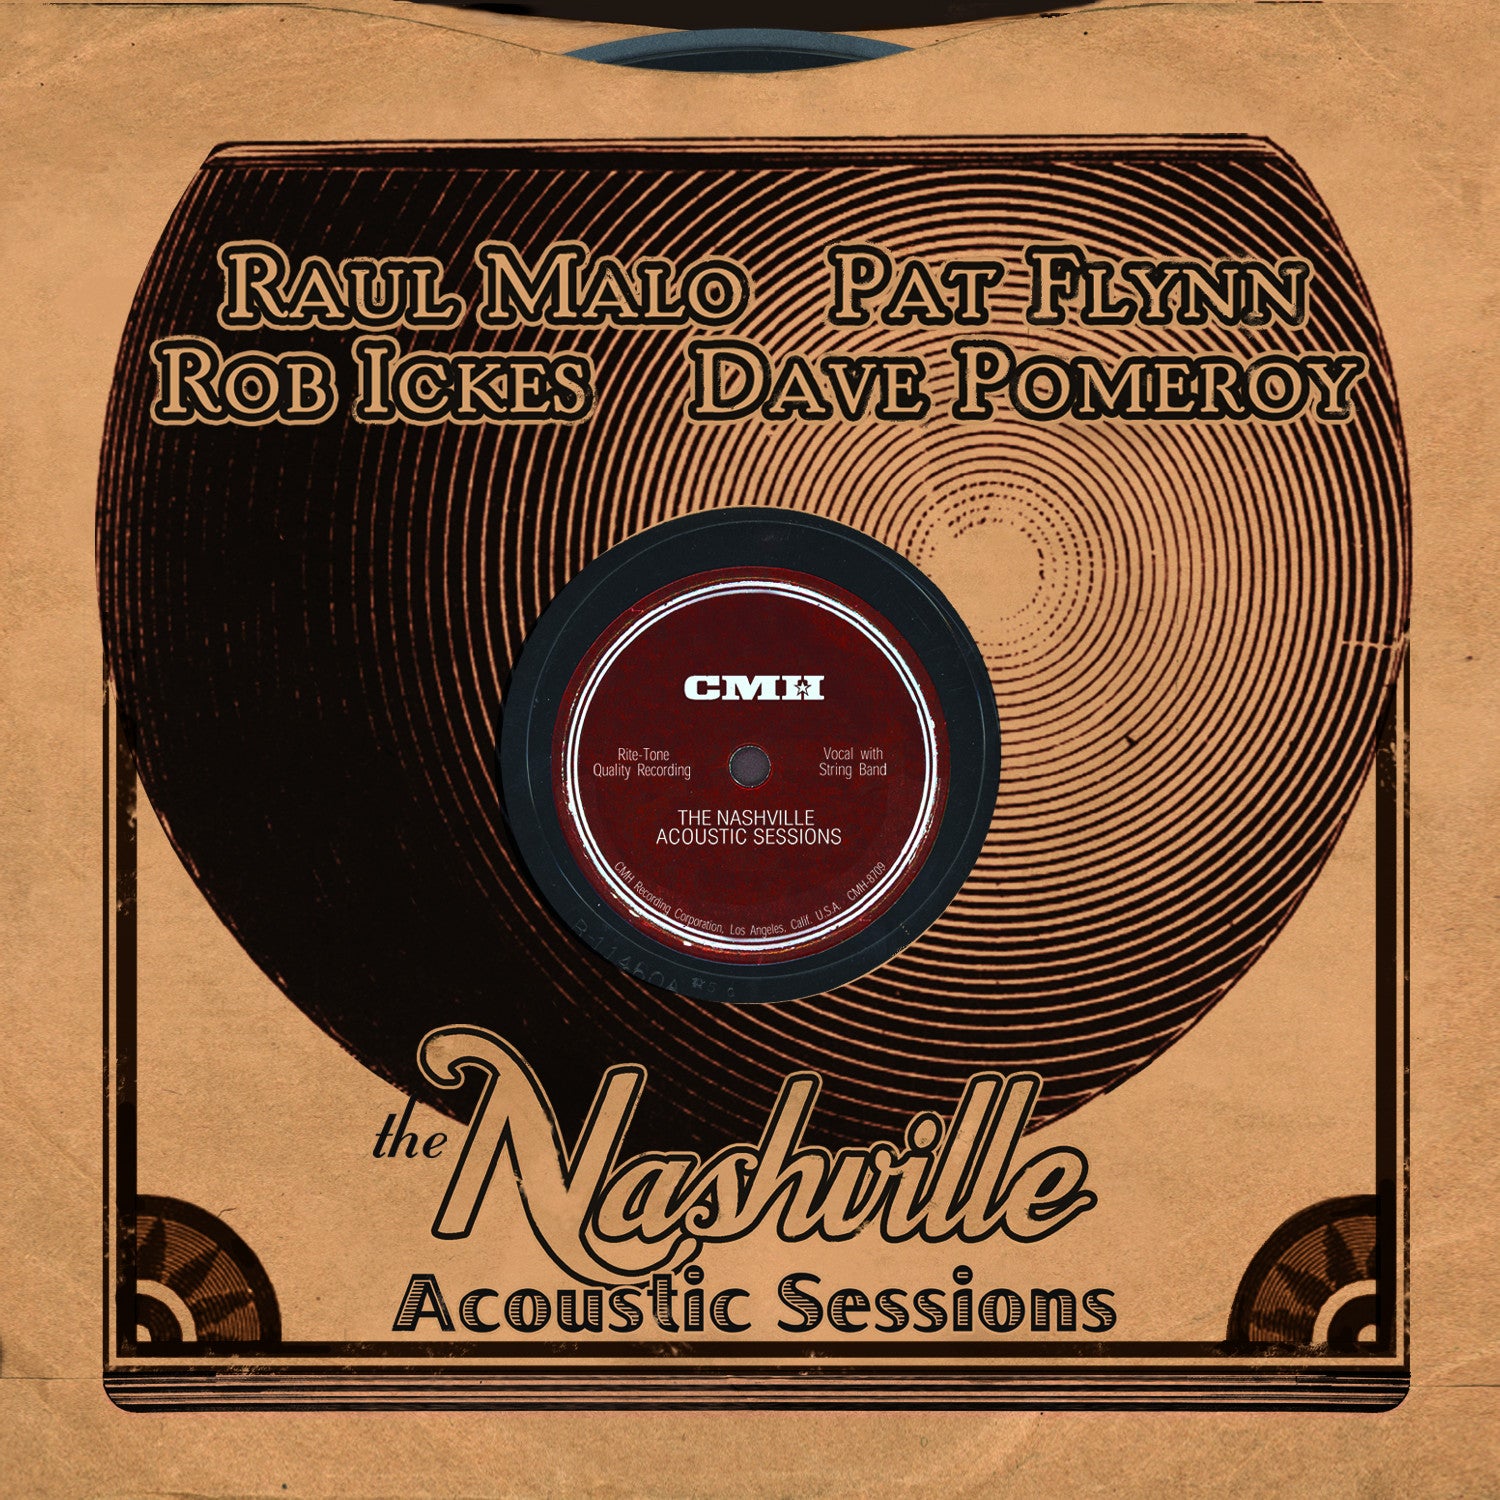 Raul Malo, Pat Flynn, Rob Ickes, Dave Pomeroy: The Nashville Acoustic Sessions